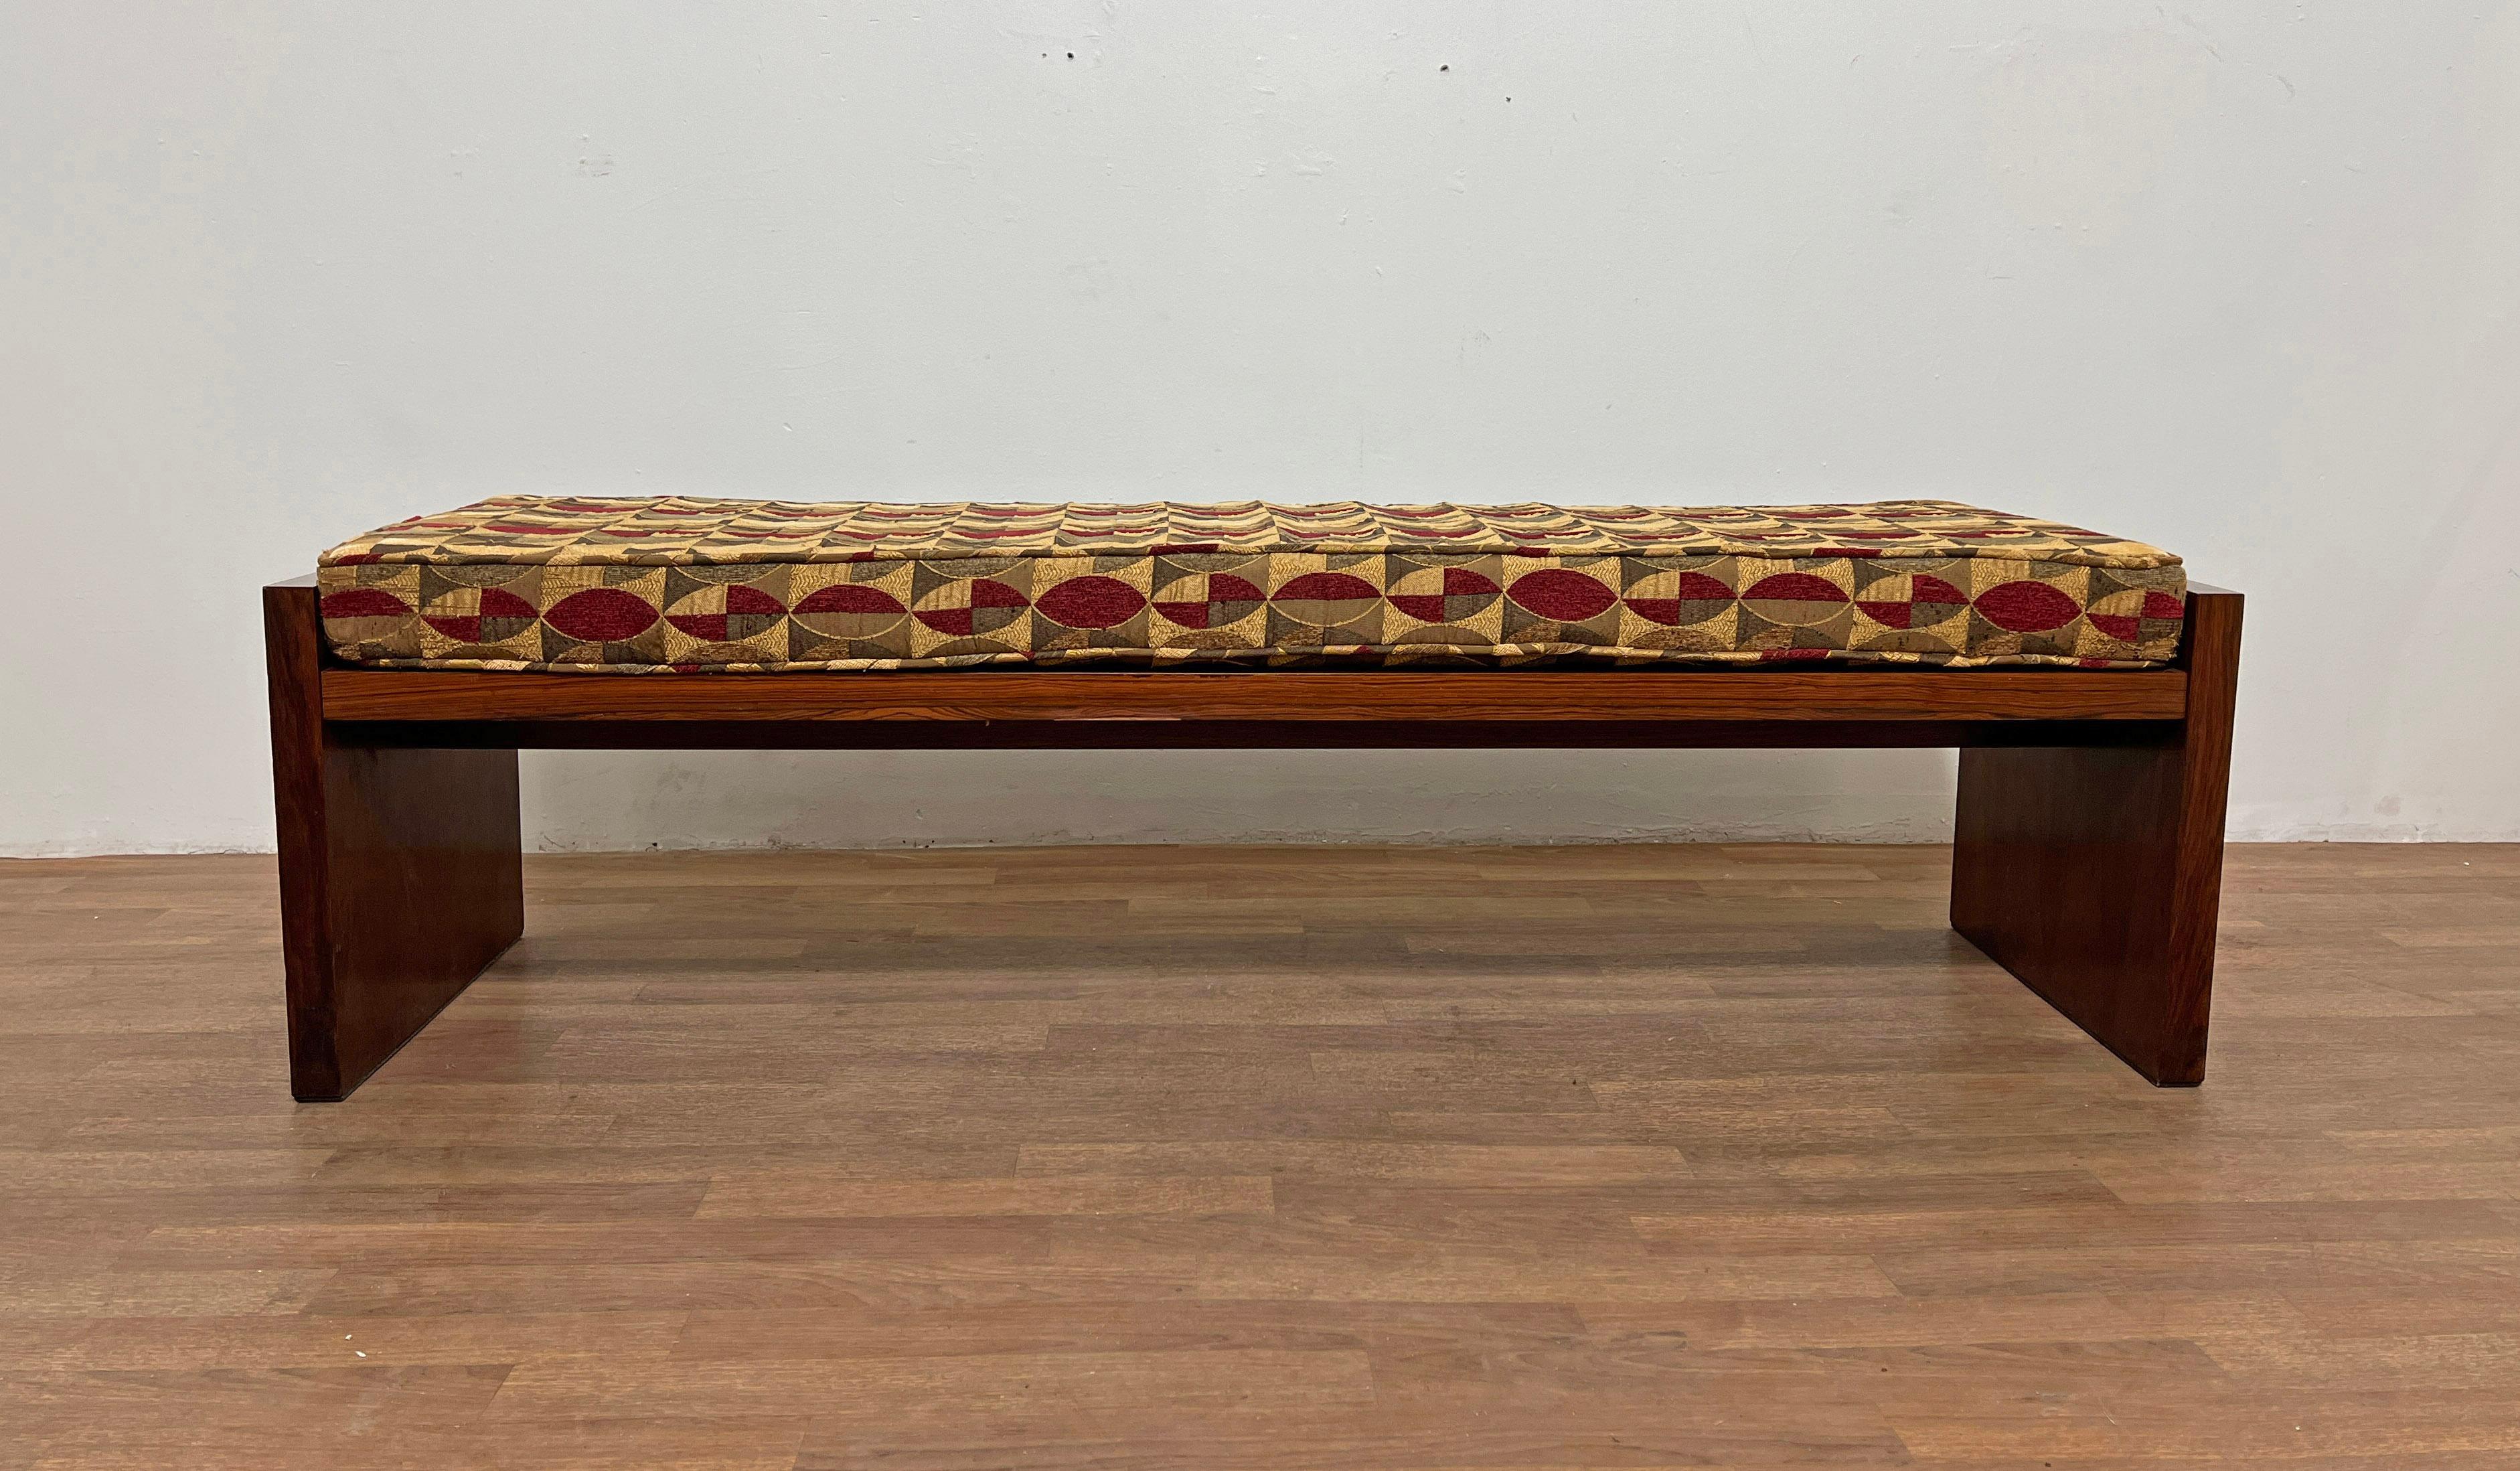 A rosewood bench by Dunbar, ca. 1960, with original seat cushion and what appears to be a Jack Lenor Larsen jacquard fabric.  This all-wood version of Dunbar's bench is most often attributed to Ed Wormley, while a similar design with chrome or